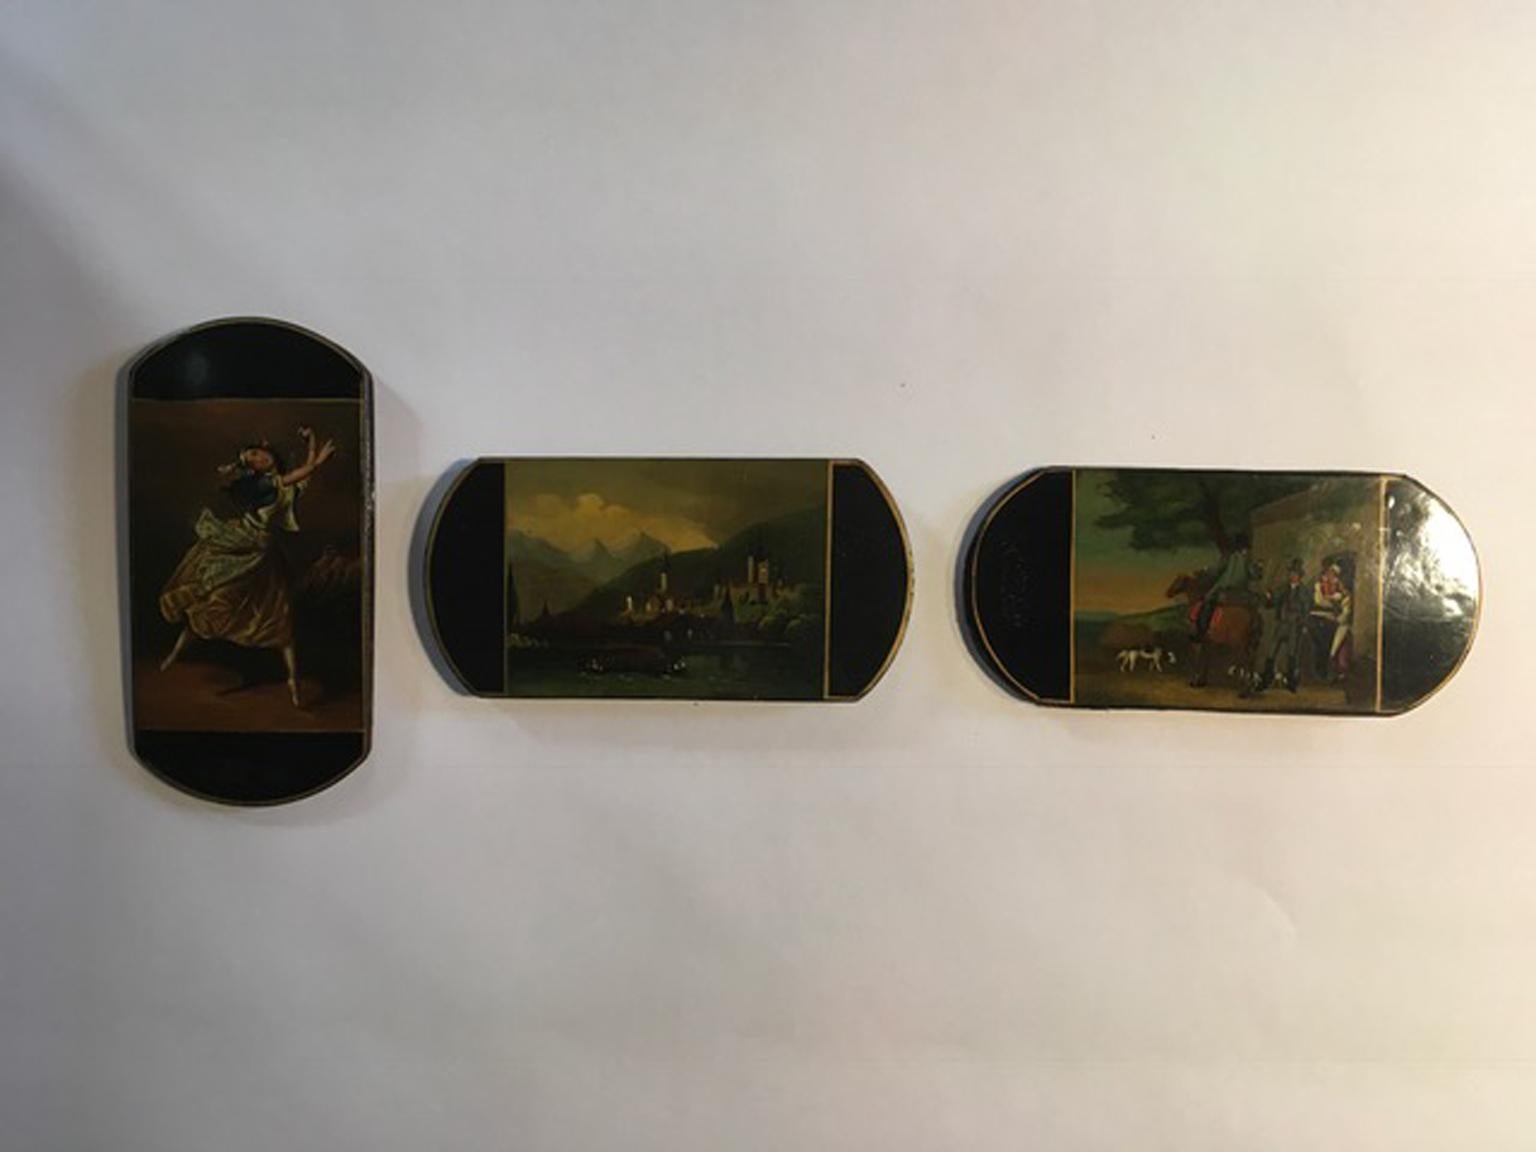 These fine wood lacquered wood boxes in Baroque style, are painted both on the sides: there's an elegant lady portrait on one side and on the other side, a natural landscape, so fine to look like a Flemish painting.
One box has the original small